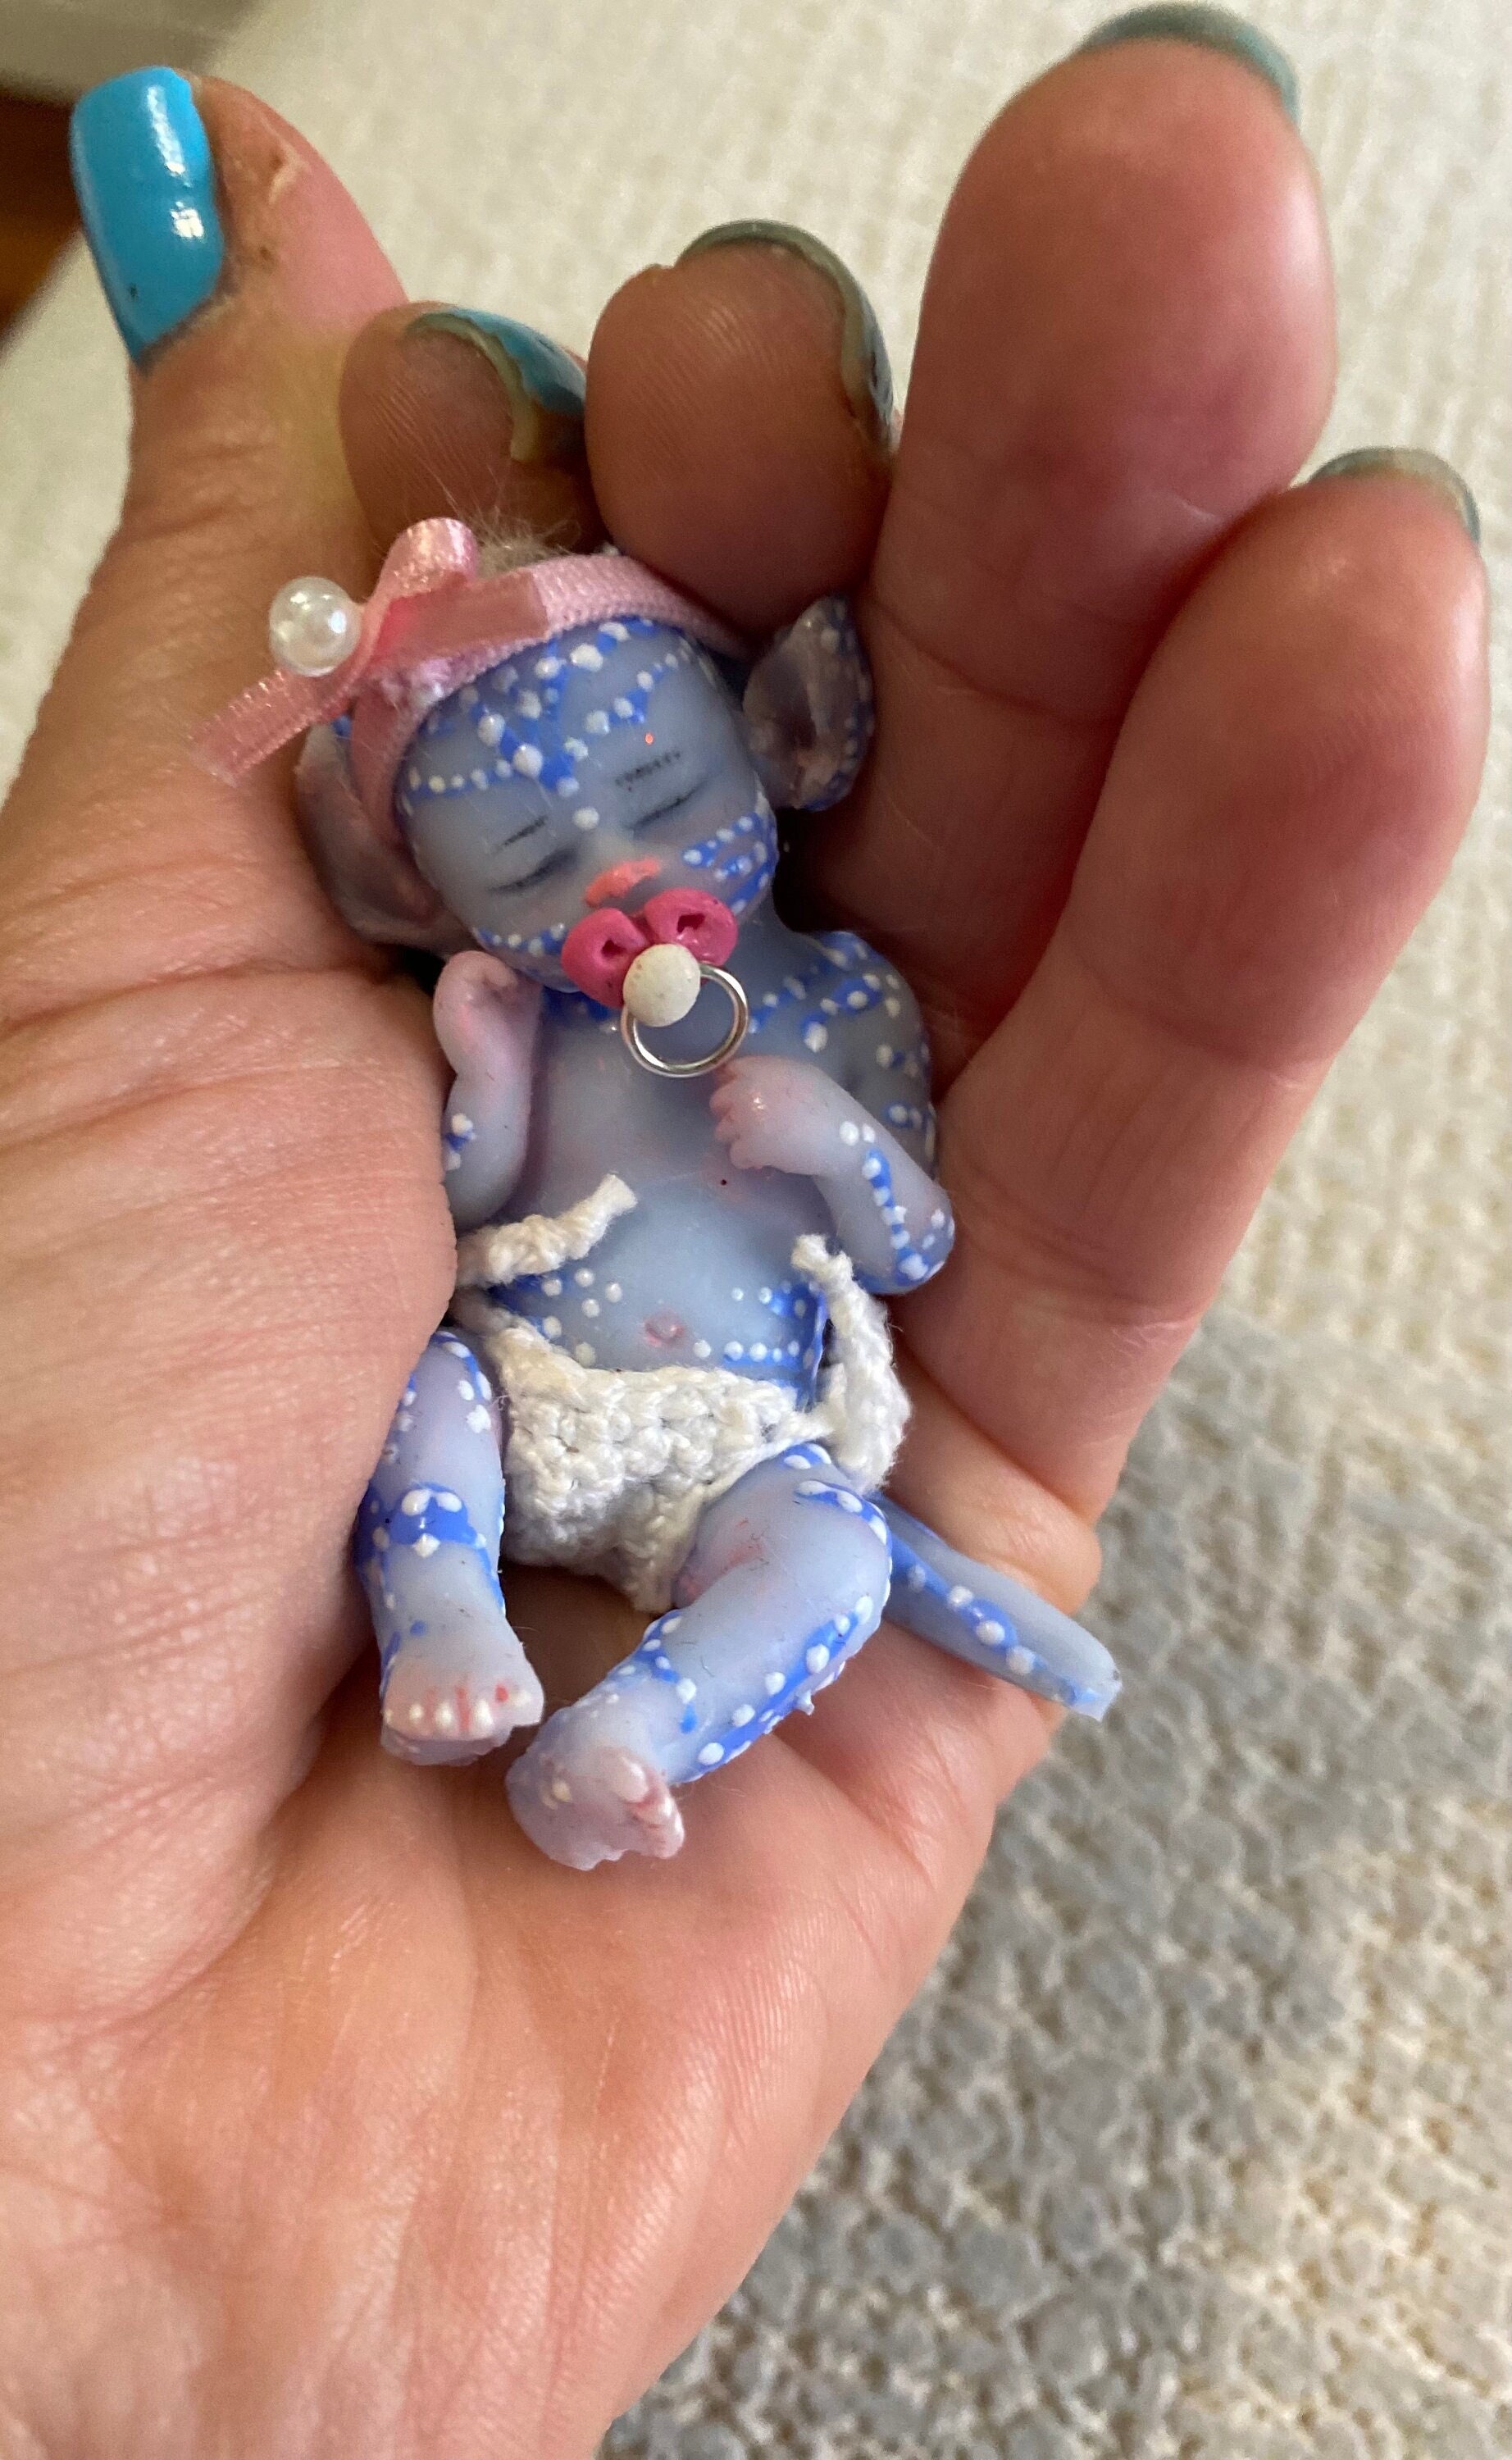 Solid Silicone Miniature Eggy Fantasy Babies 2-2.5inches made to